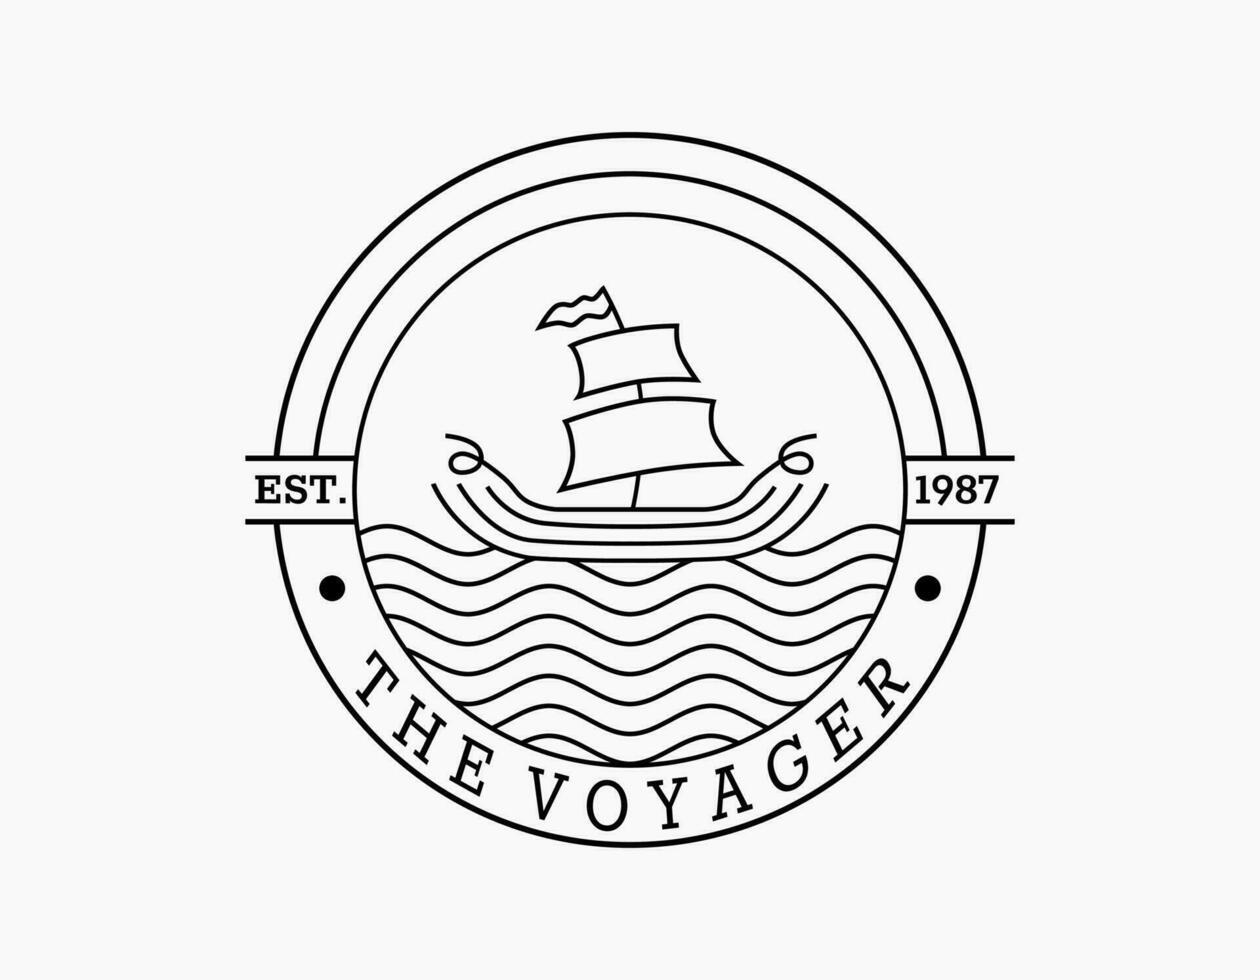 Vintage sailboat logo. The voyager retro of a sail boat. The circular logo is designed with boat and wavy ocean. Elegant logo for coffee, beach, company, travel, museum, seafood, marine, fisherman. vector